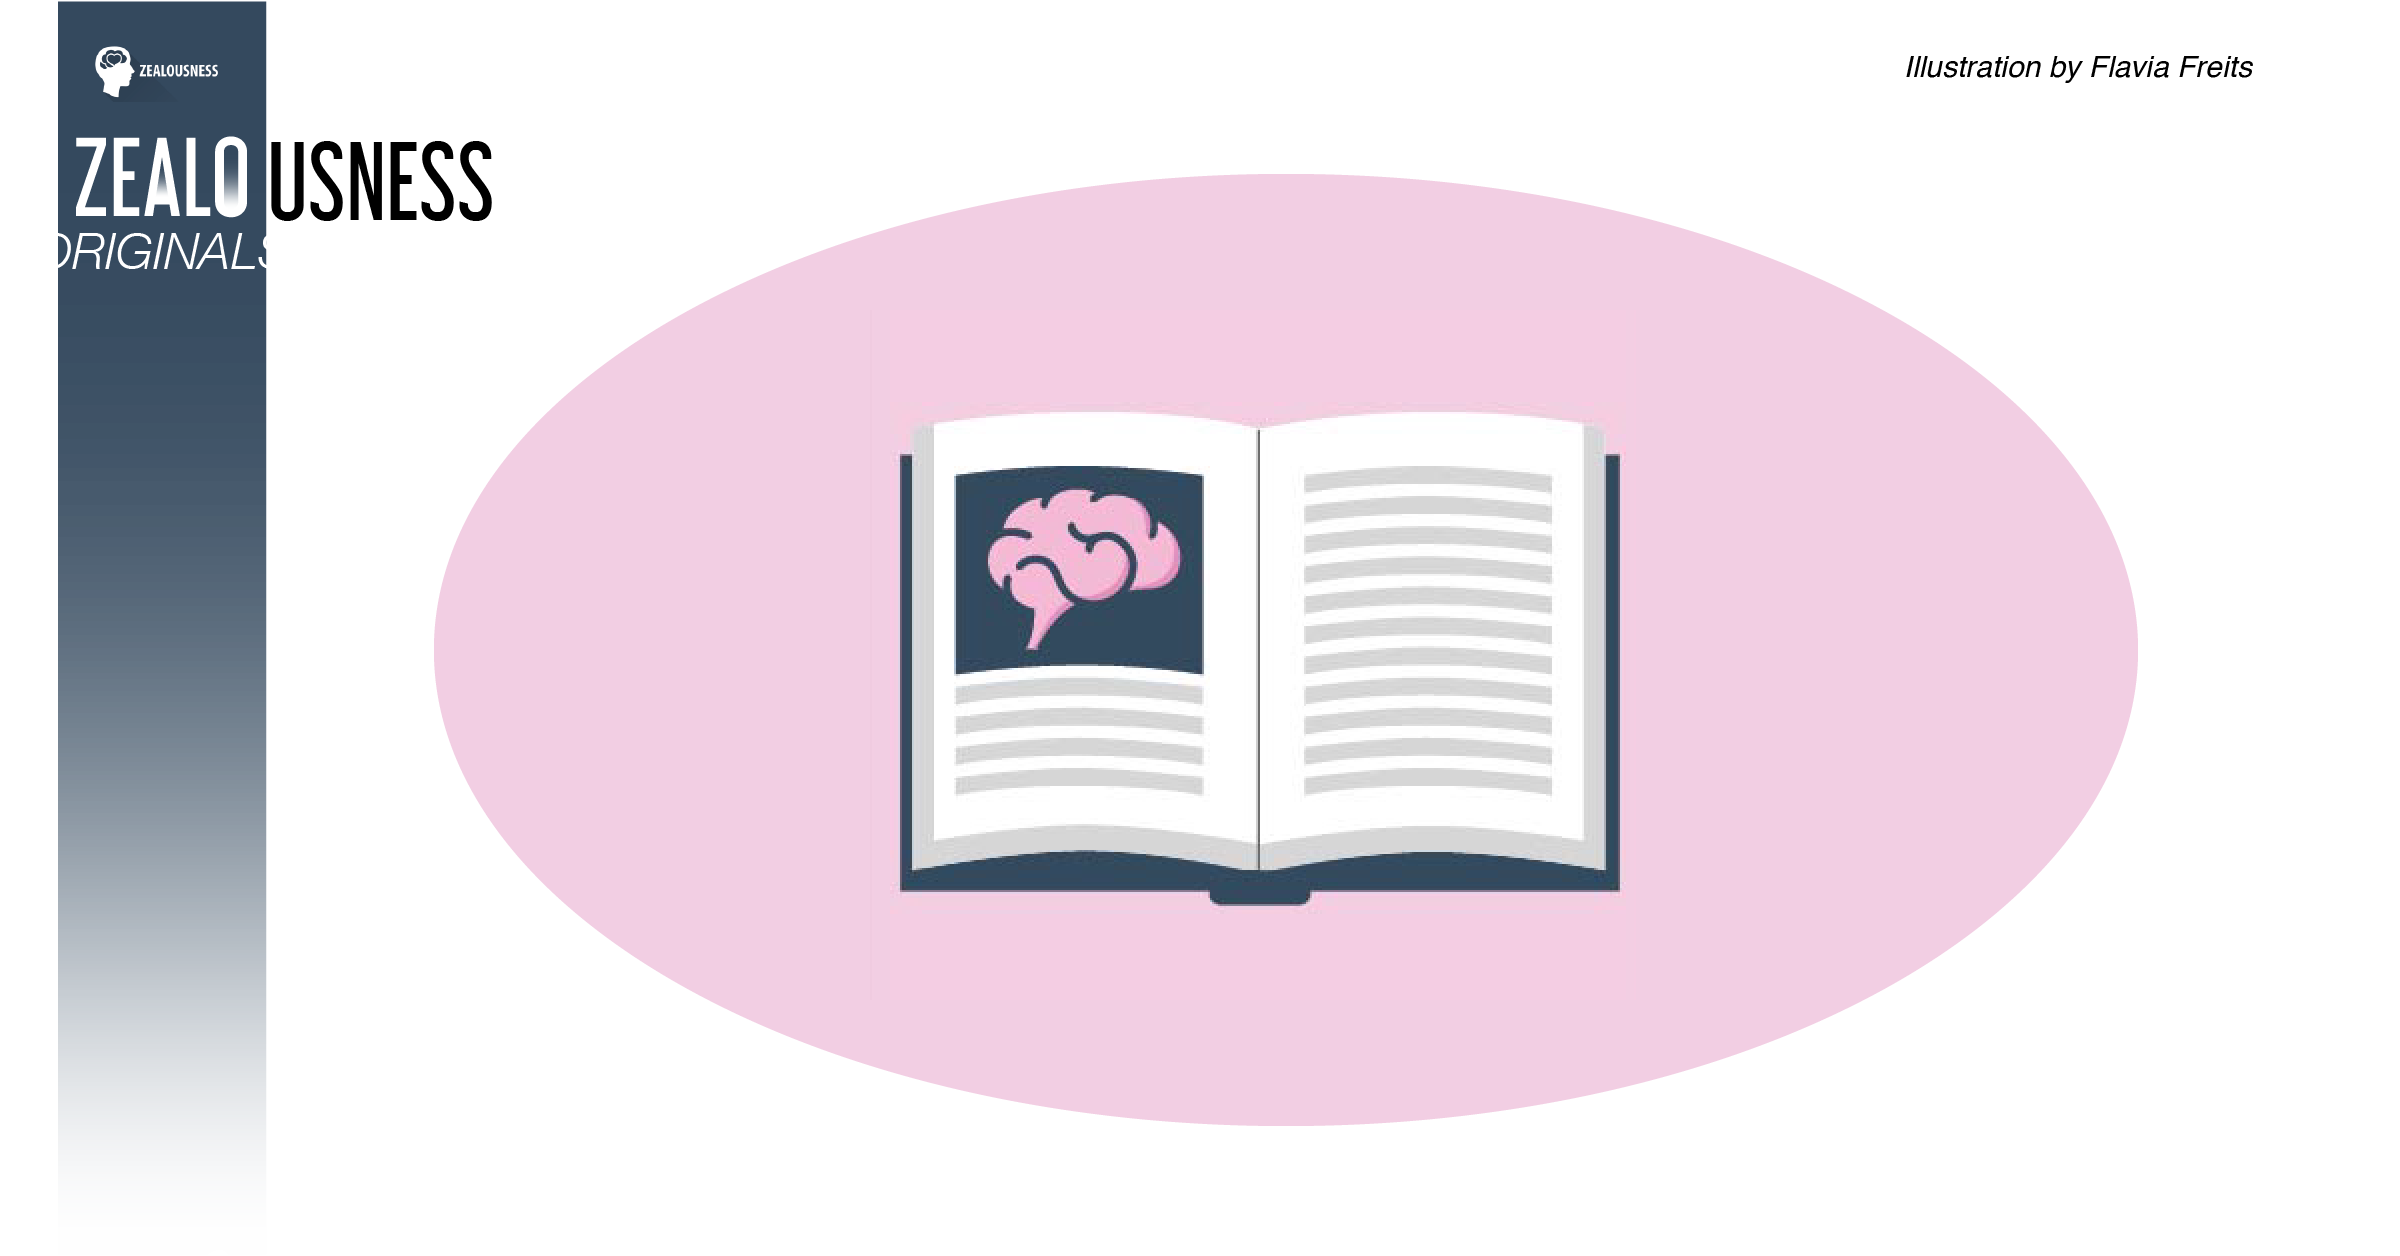 A book with an image of a brain on a pink background.